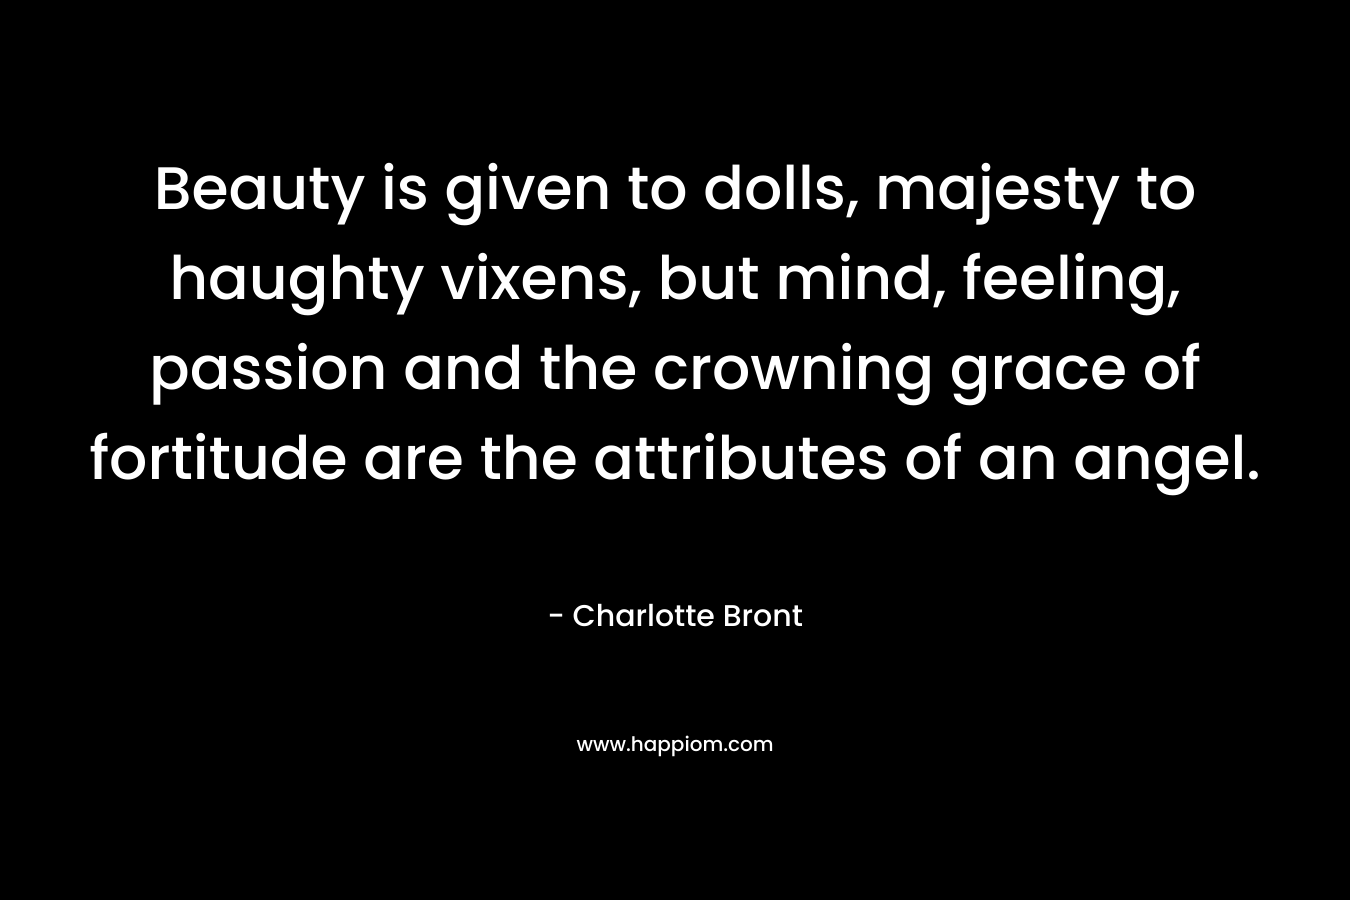 Beauty is given to dolls, majesty to haughty vixens, but mind, feeling, passion and the crowning grace of fortitude are the attributes of an angel.